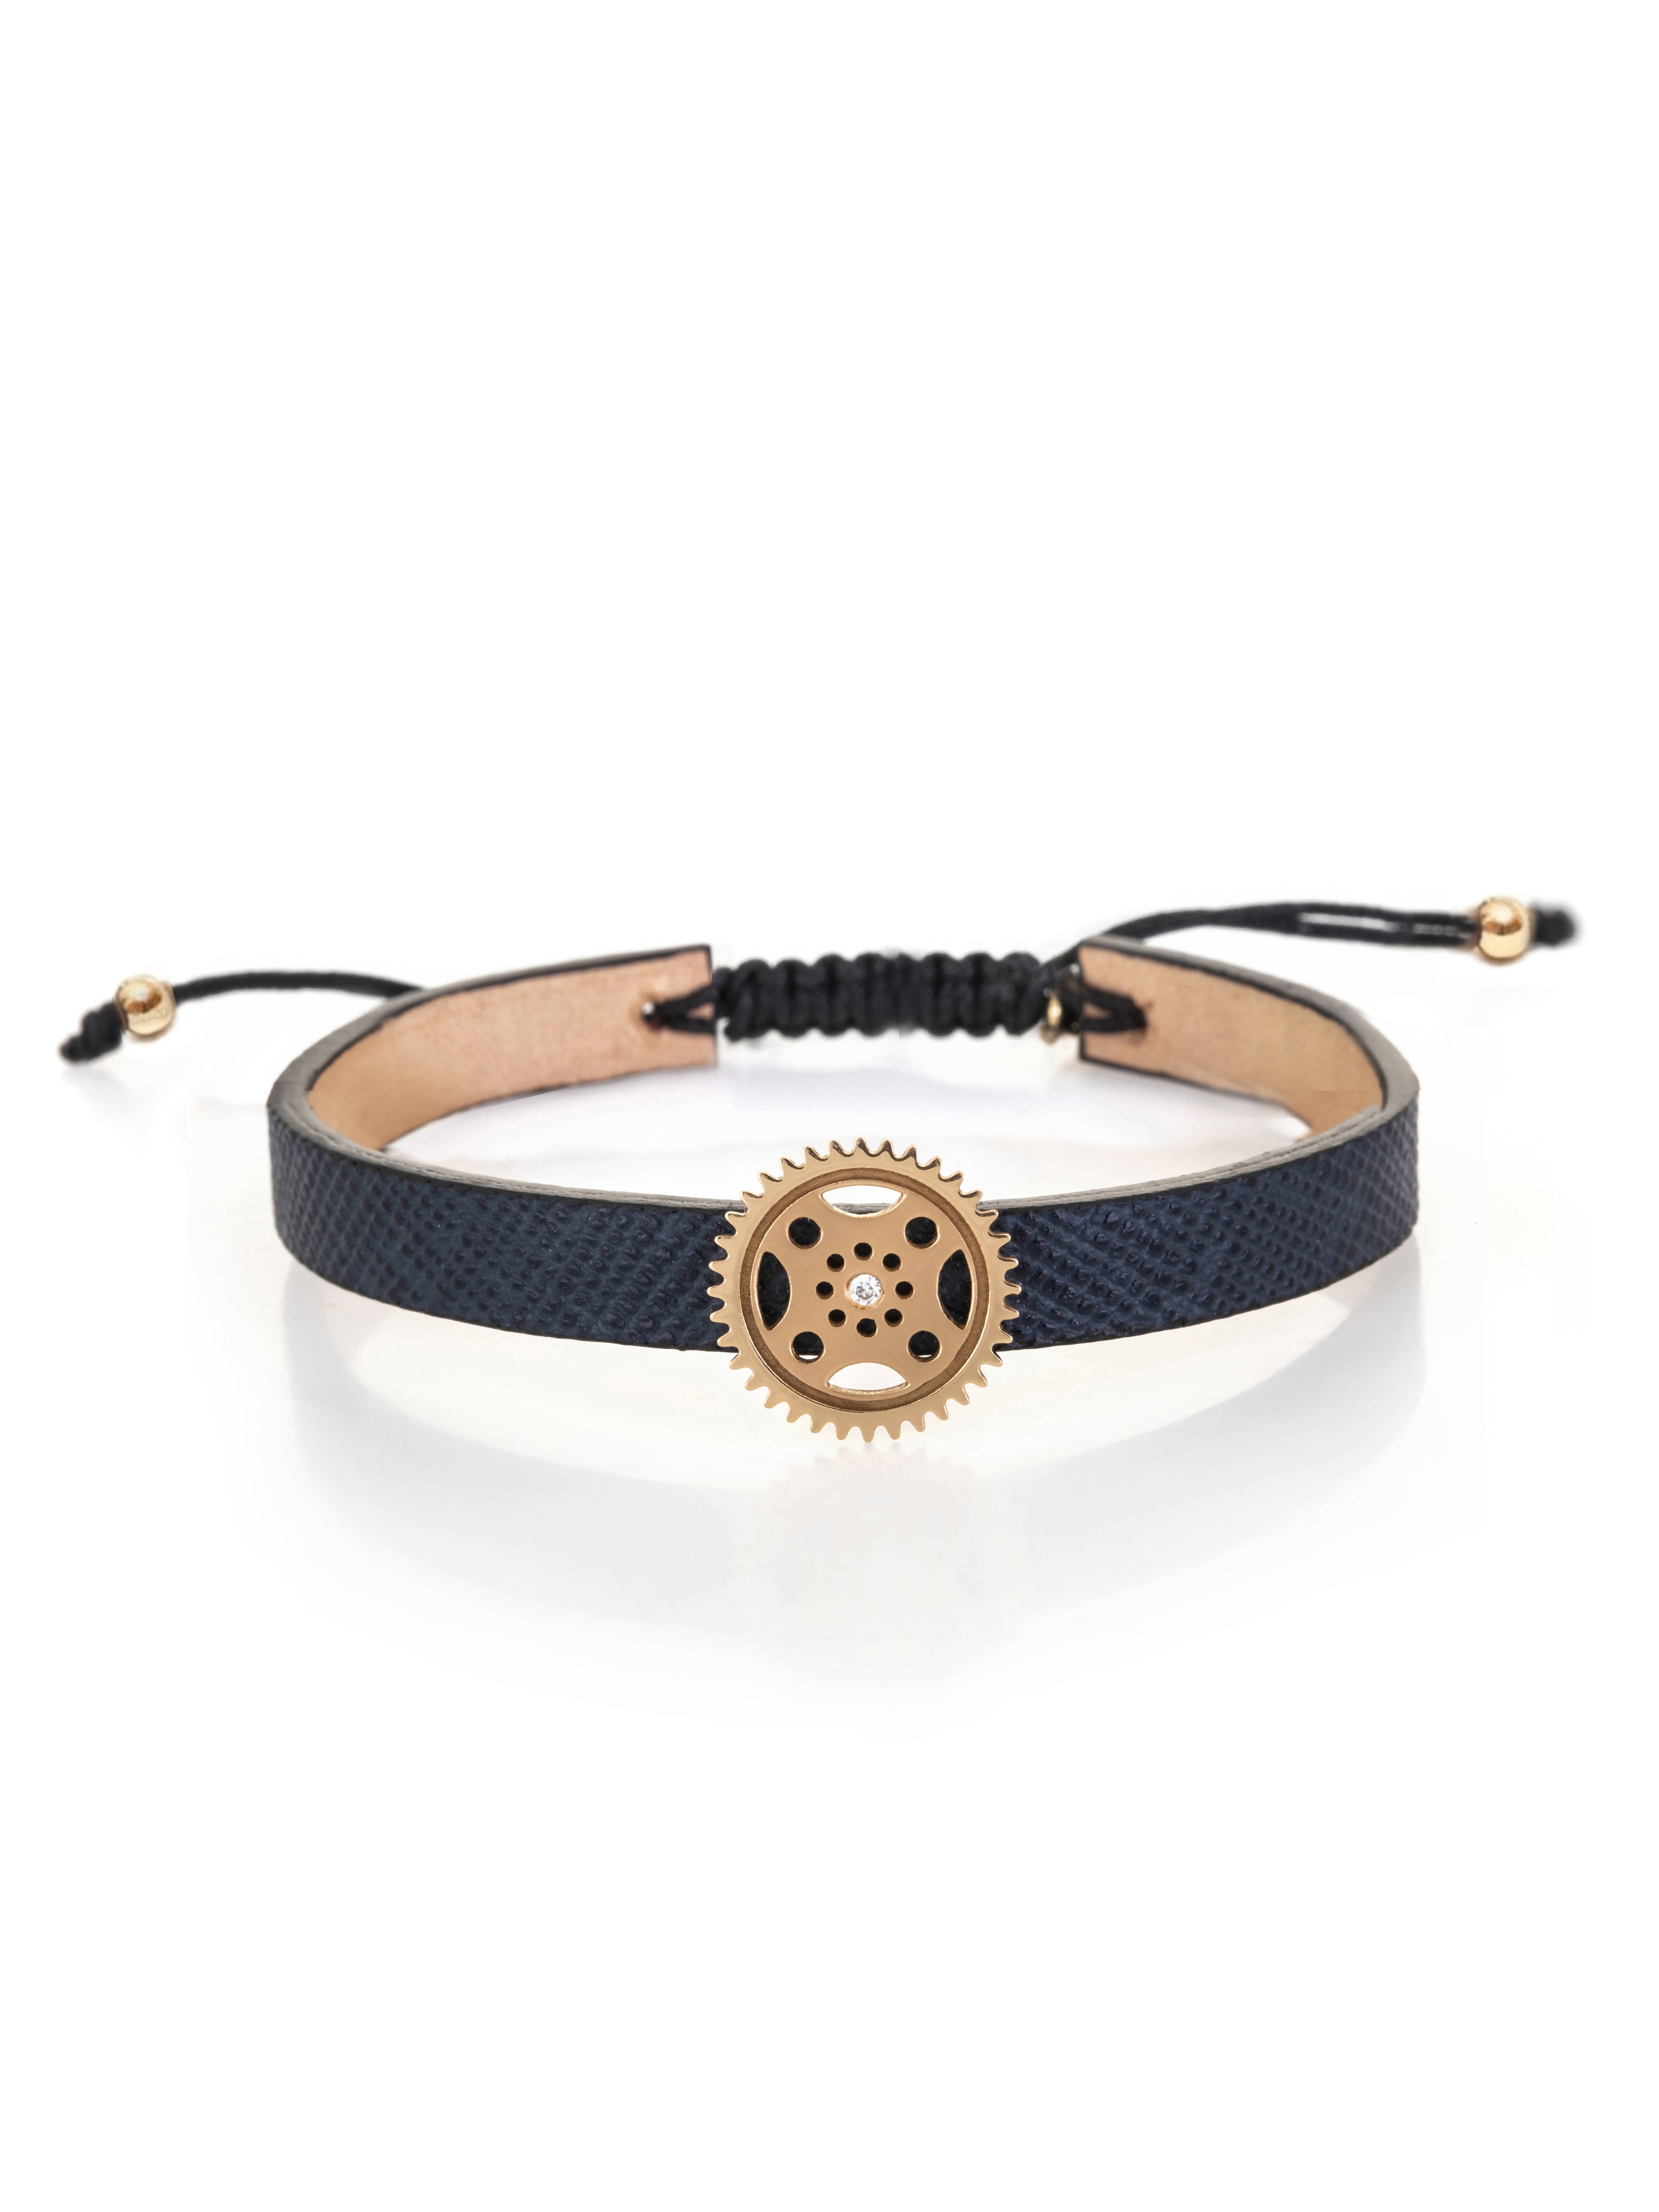 gold-uno-gear-leather-bracelet-soft buckle- By delcy